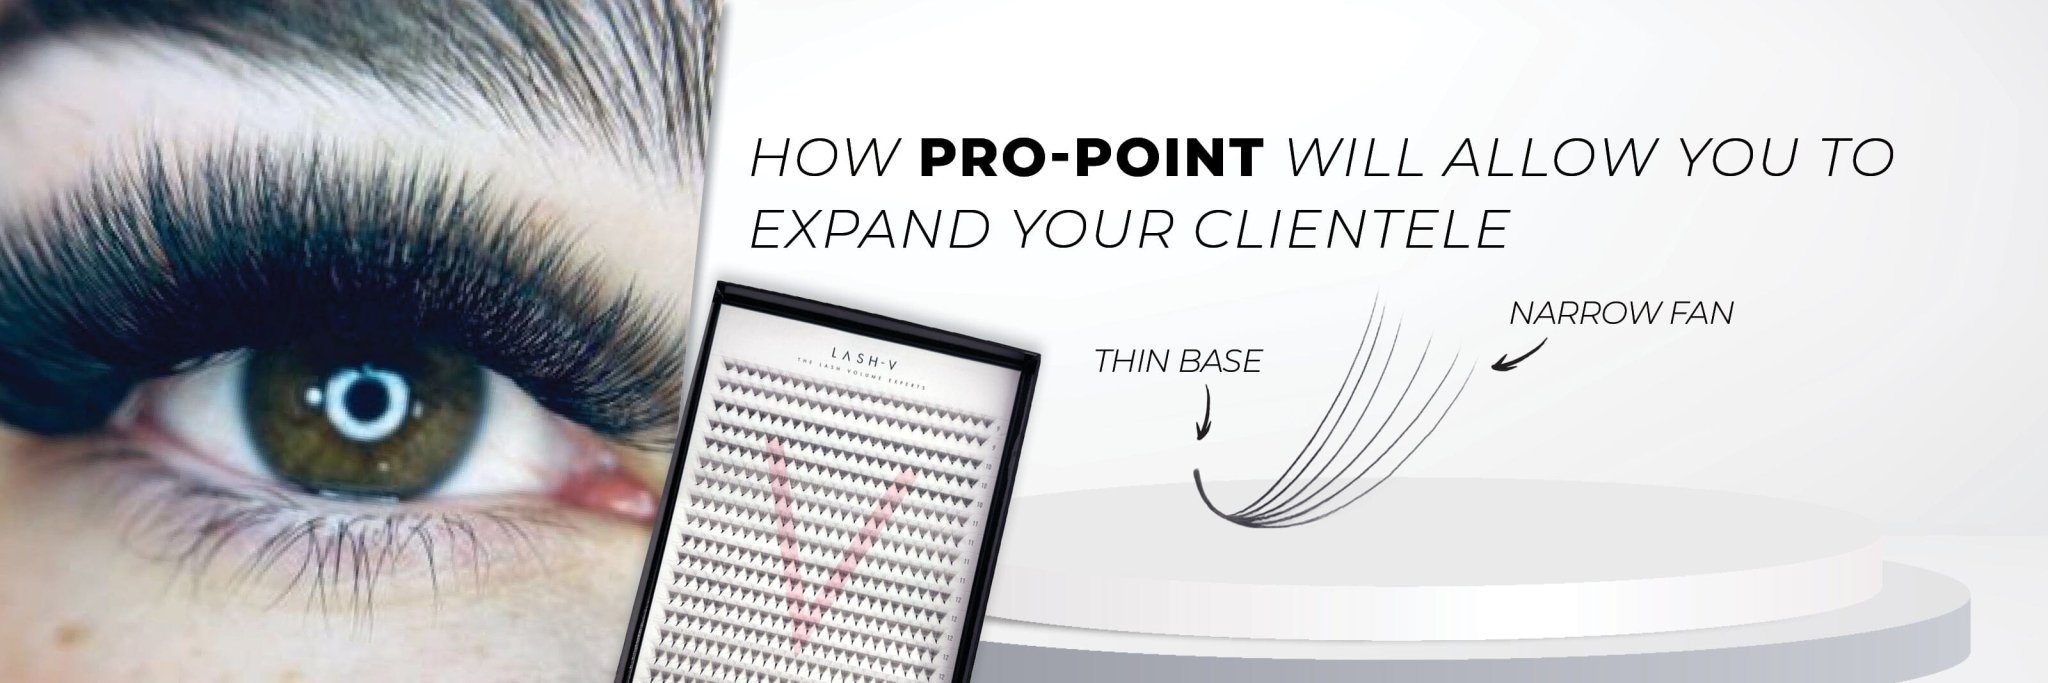 5 Reasons why Pro-Point Narrow Fans will allow you to expand your clientele - LASH V